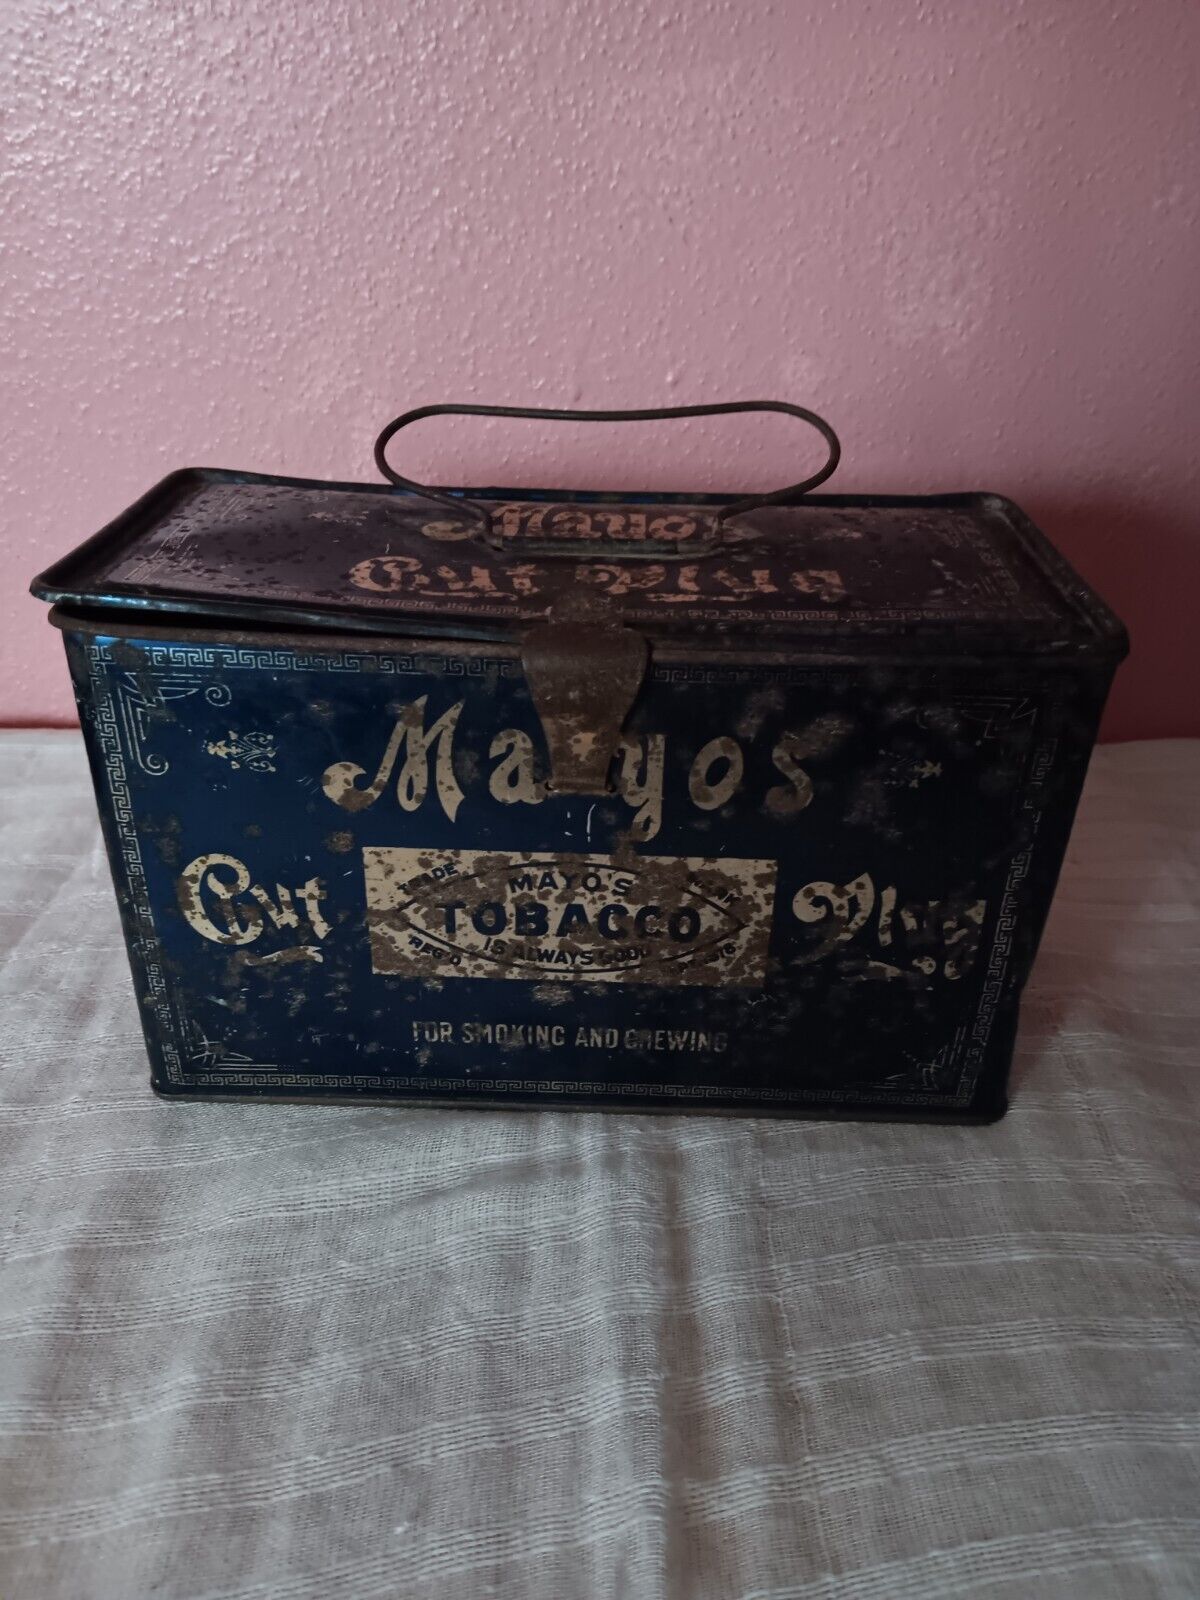 VINTAGE MAYO'S TOBACCO TIN WITH HANDLE LUNCH BOX STYLE